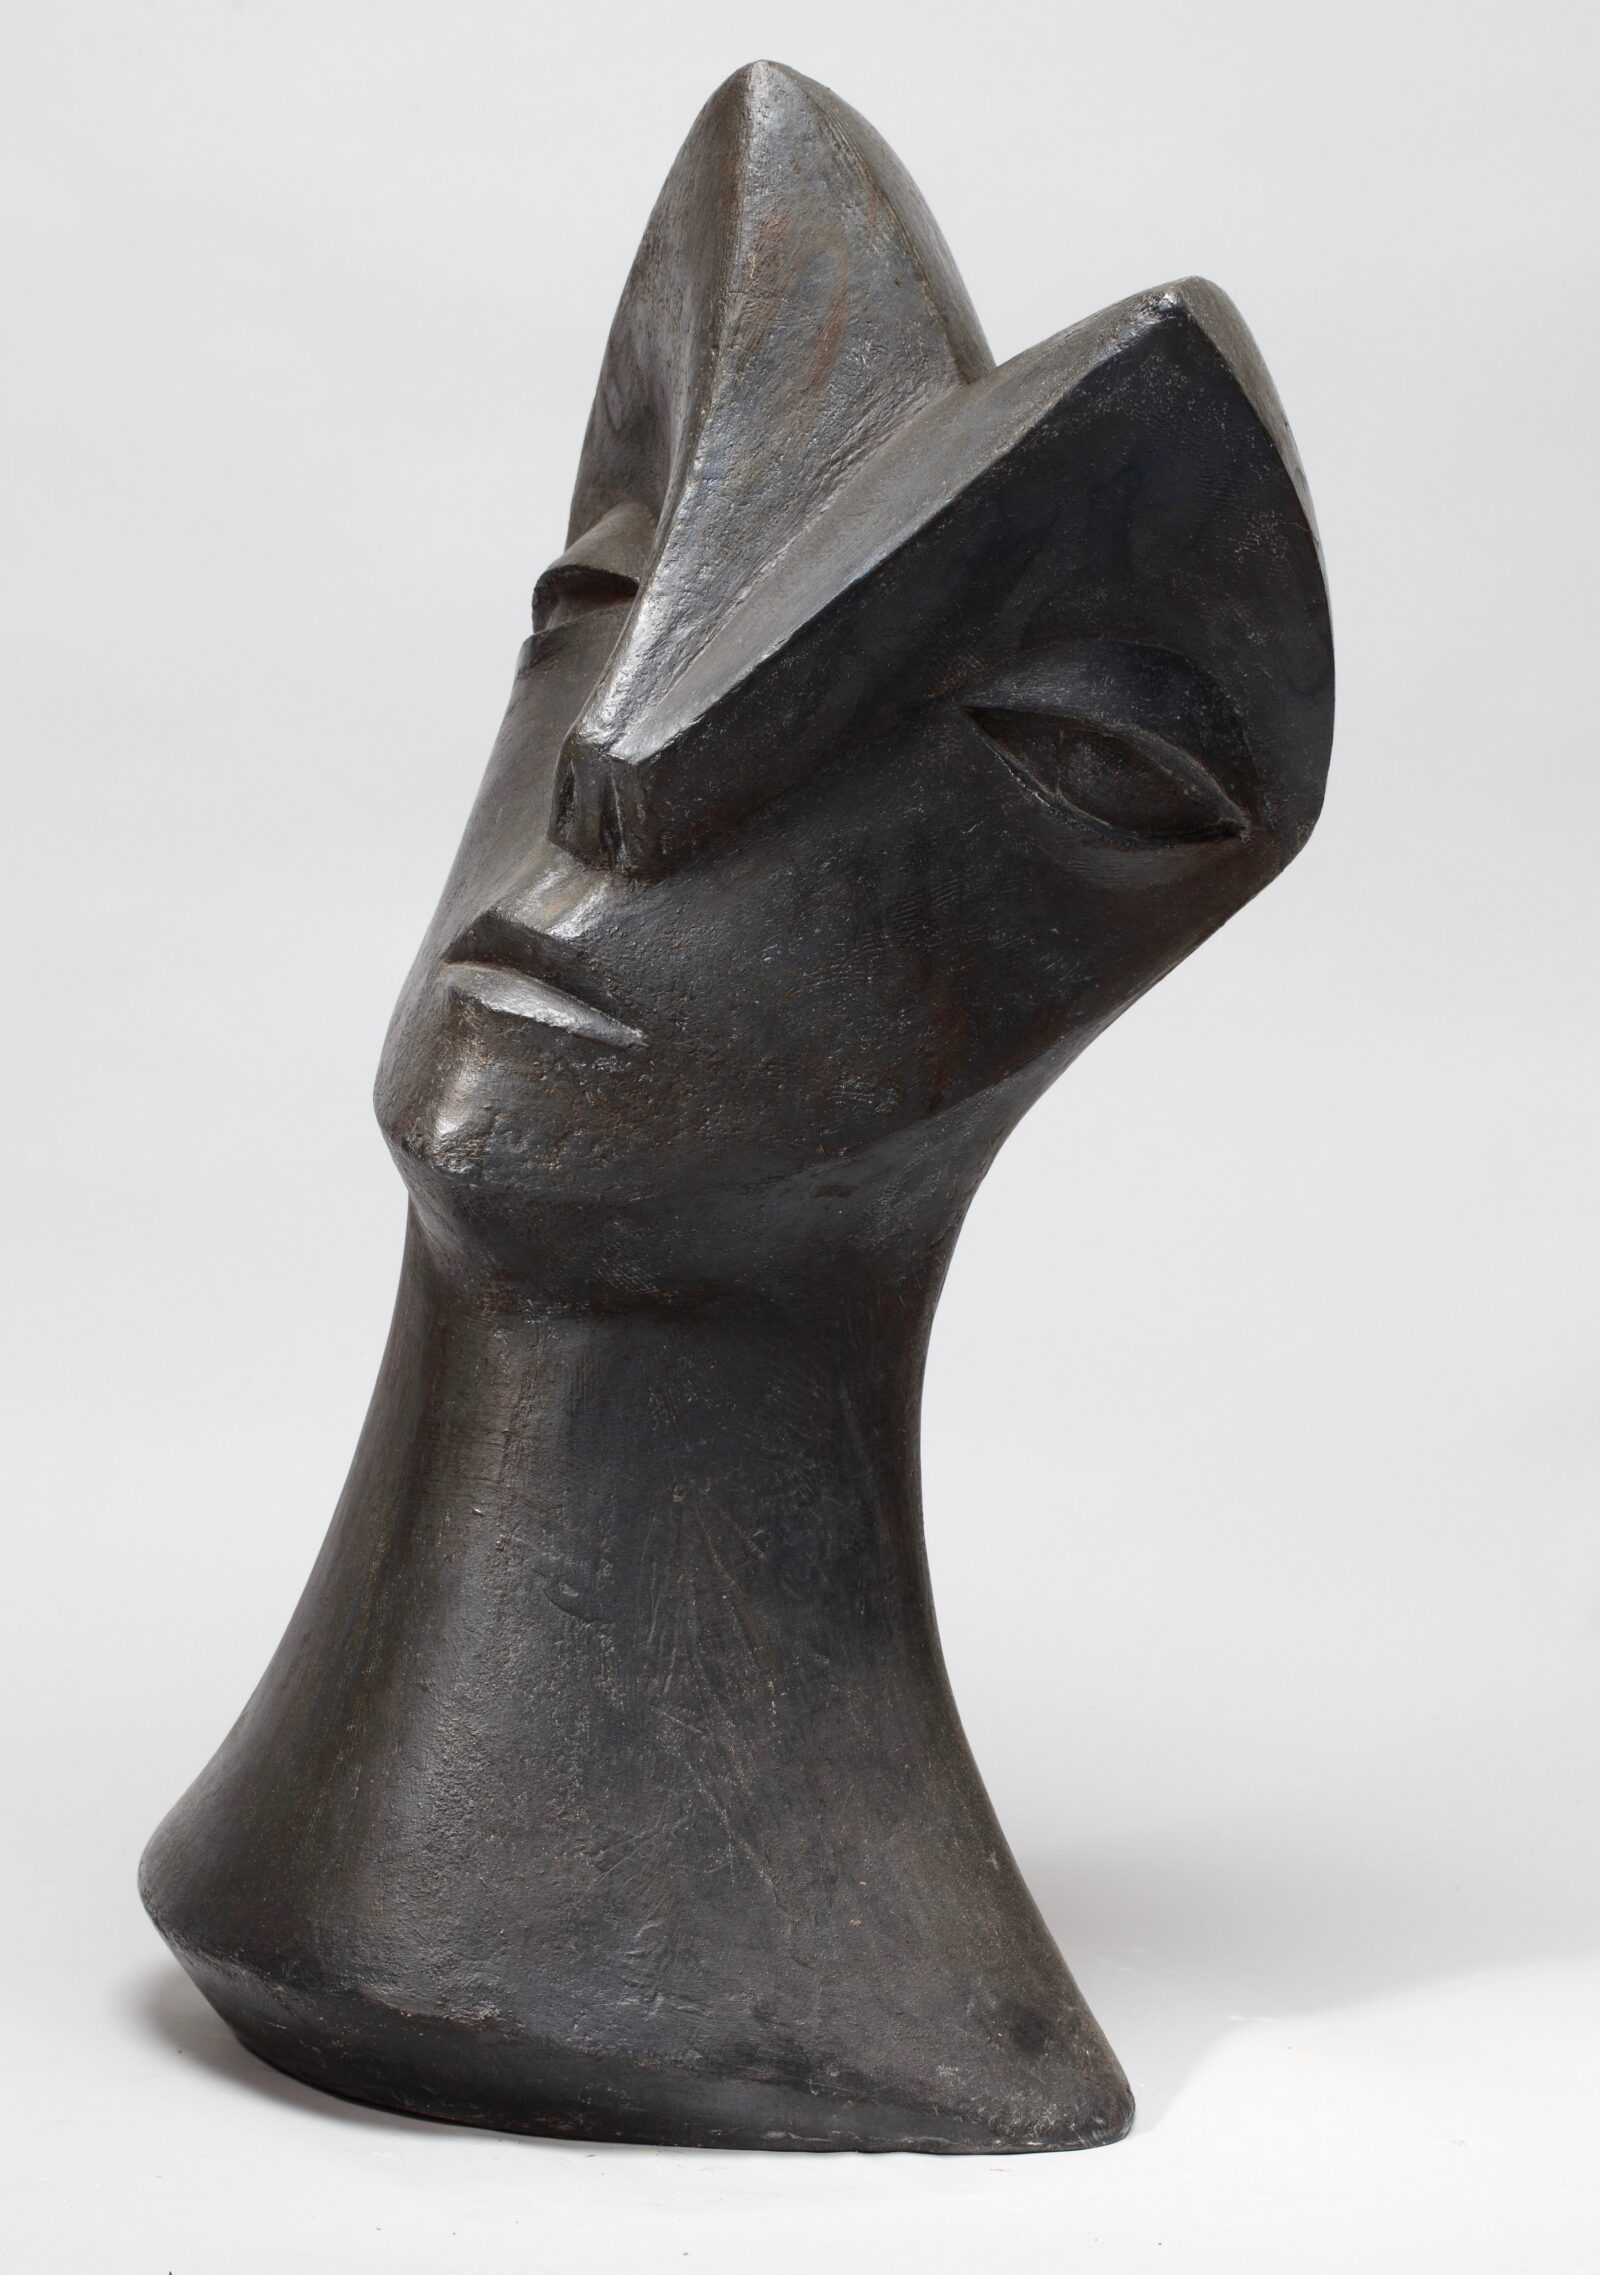 modernist ceramic sculpture of a head inspired by Picasso and African carving